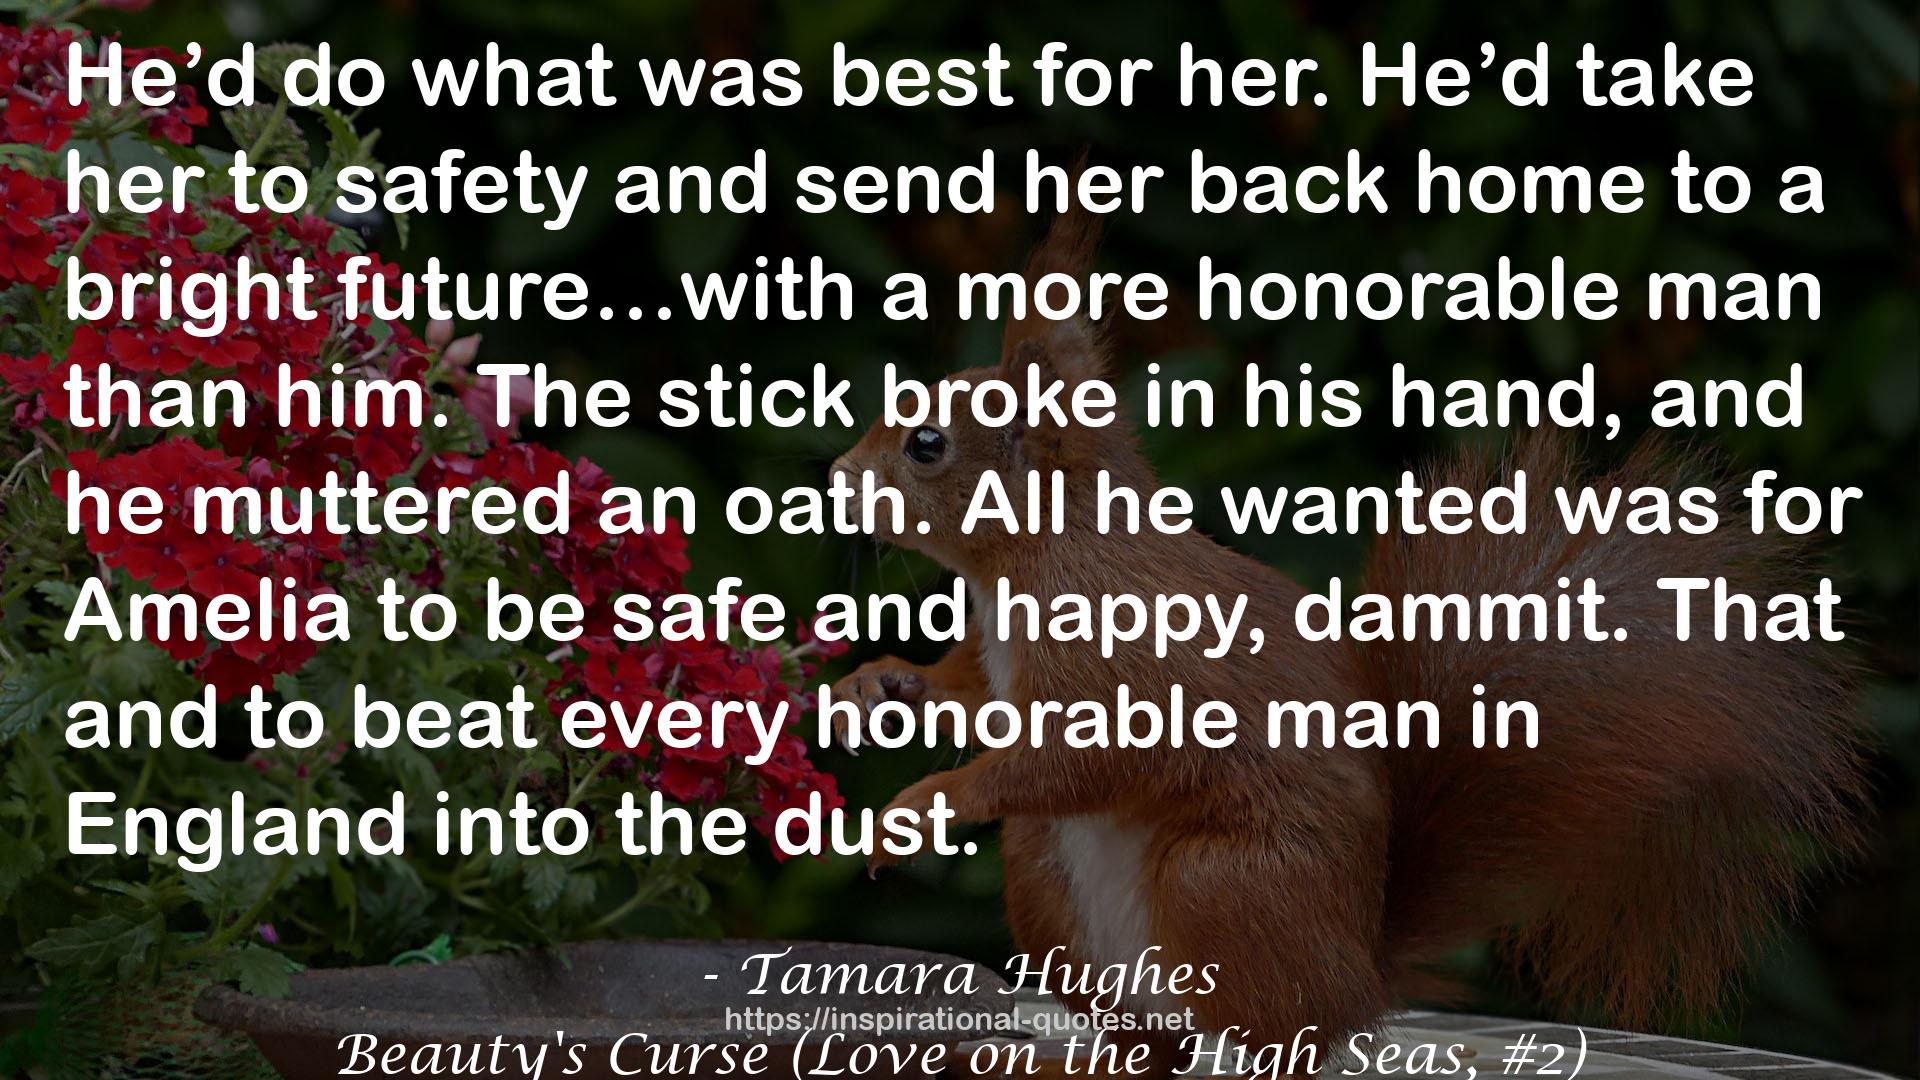 Beauty's Curse (Love on the High Seas, #2) QUOTES